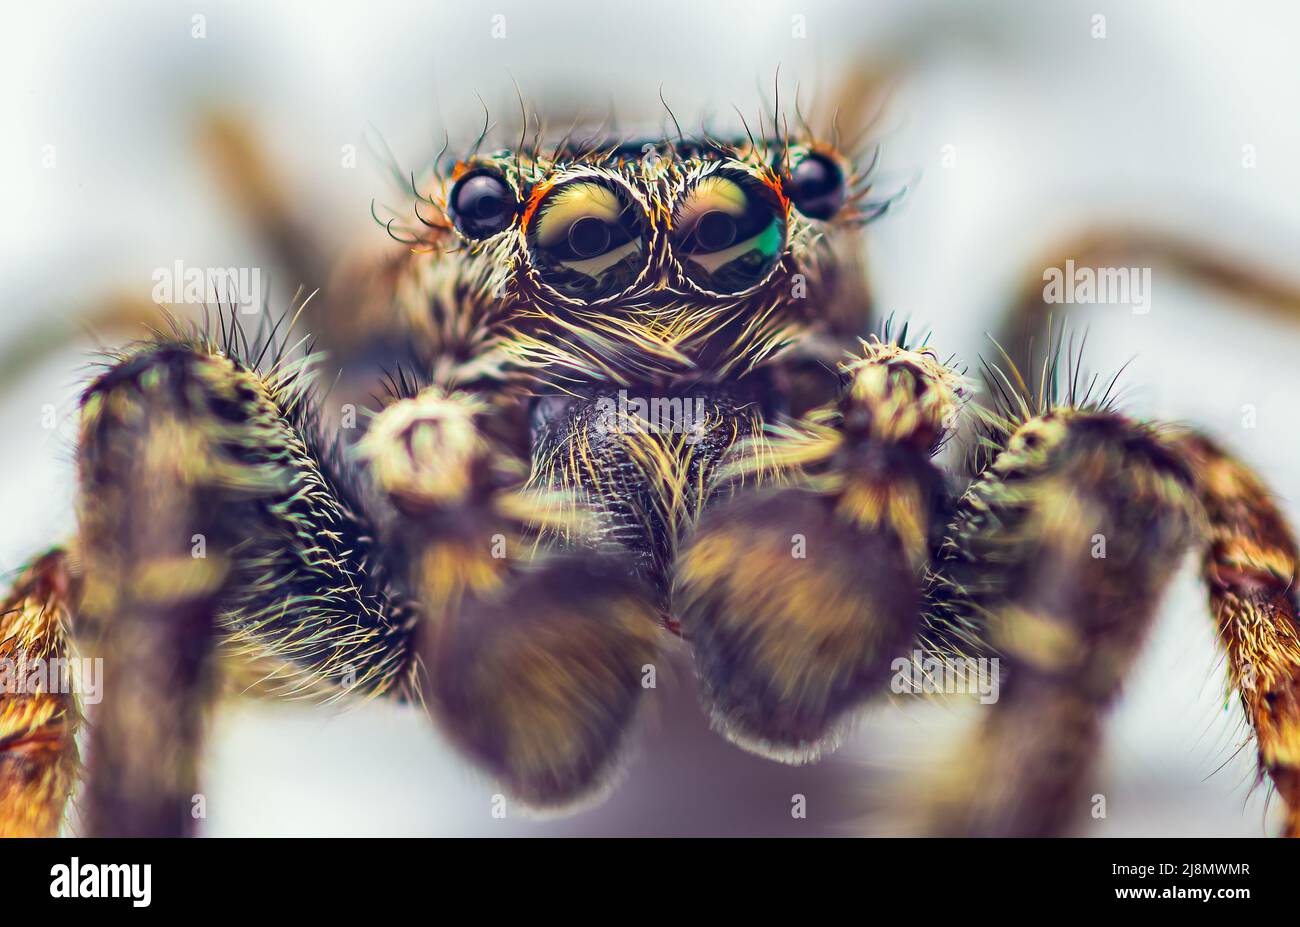 Extreme magnification - Jumping spider portrait, front view Stock Photo